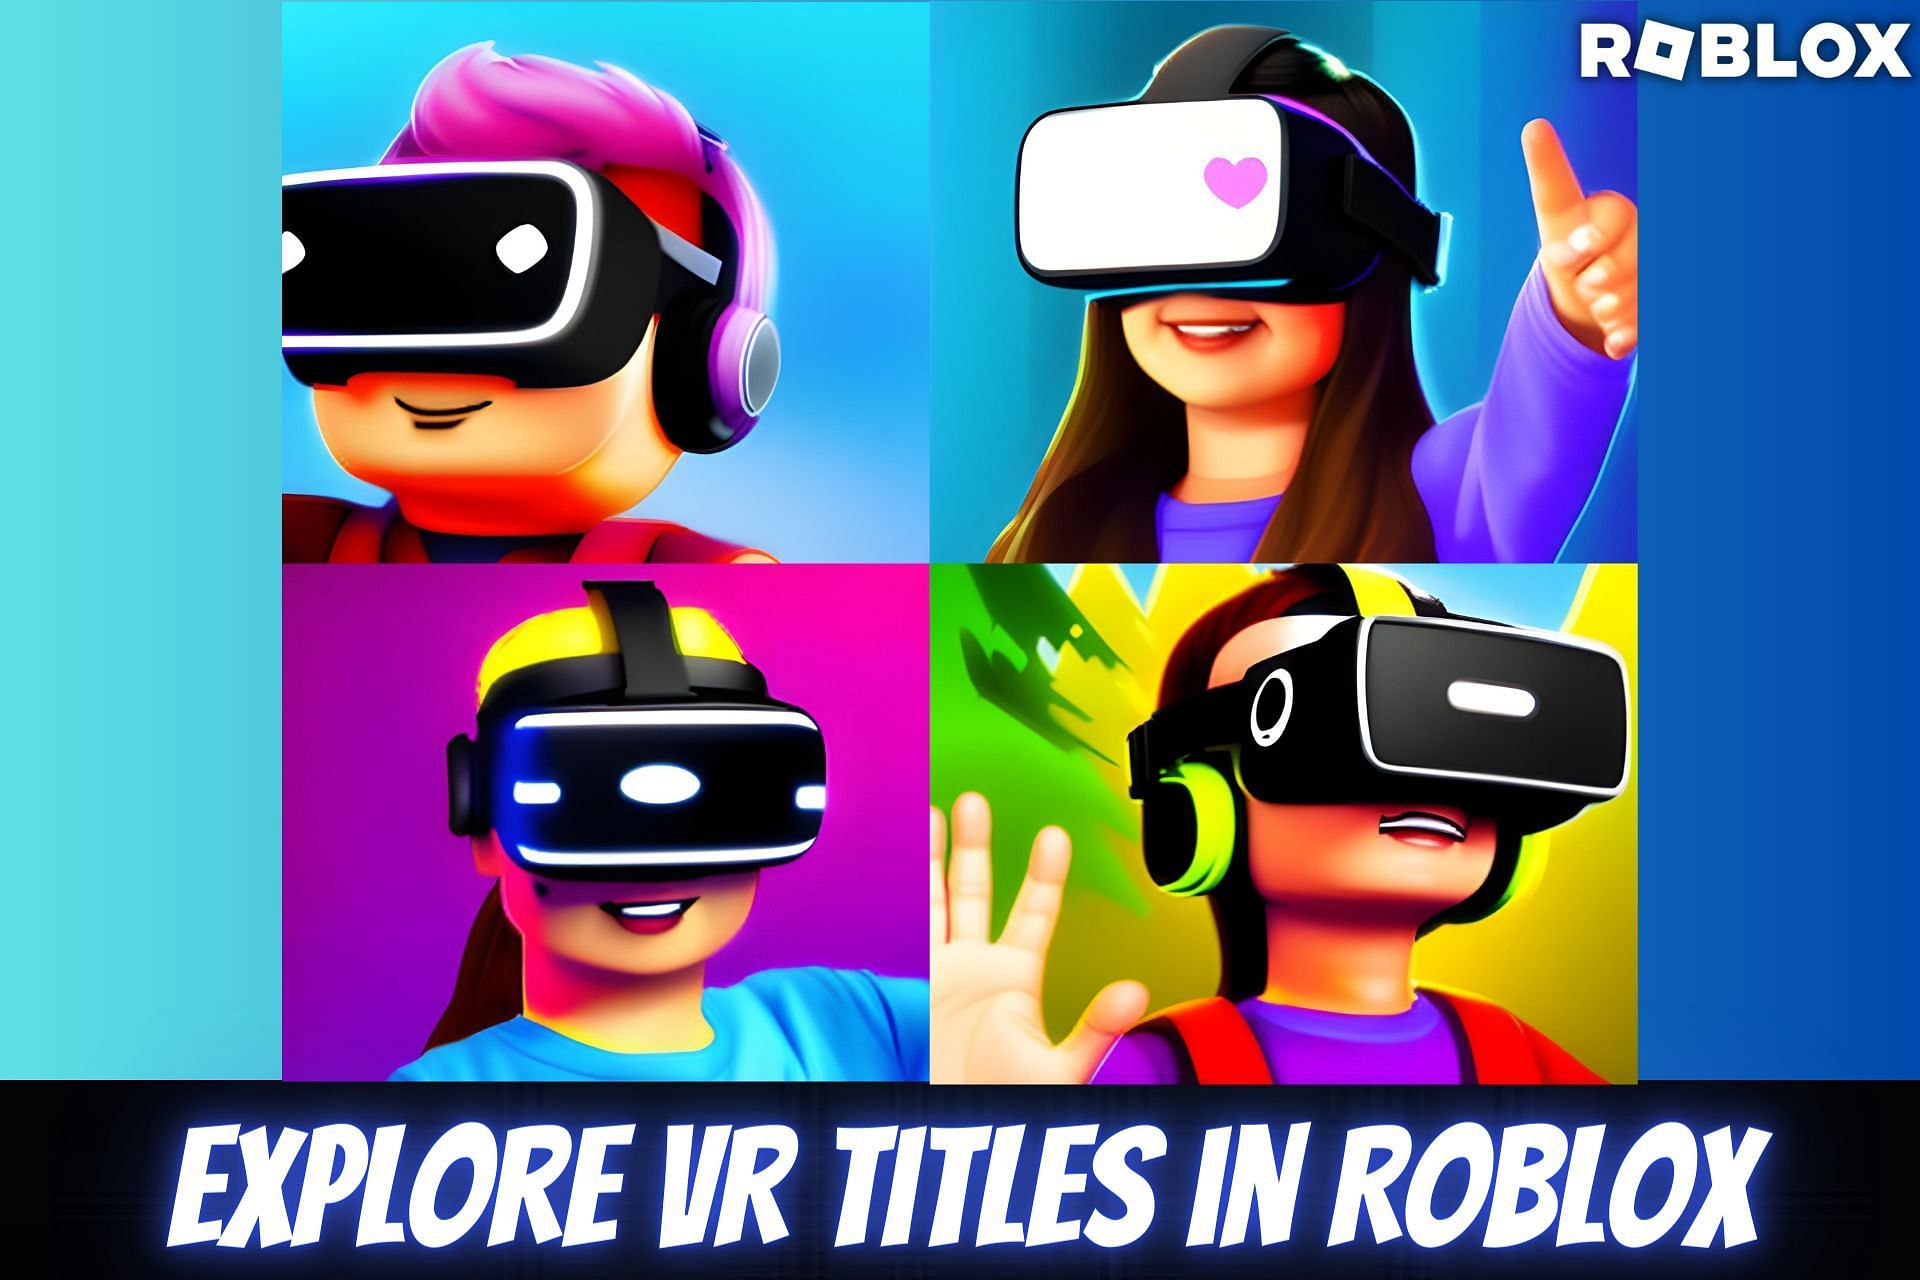 Roblox Gaming Platform: A World of Creativity and Exploration